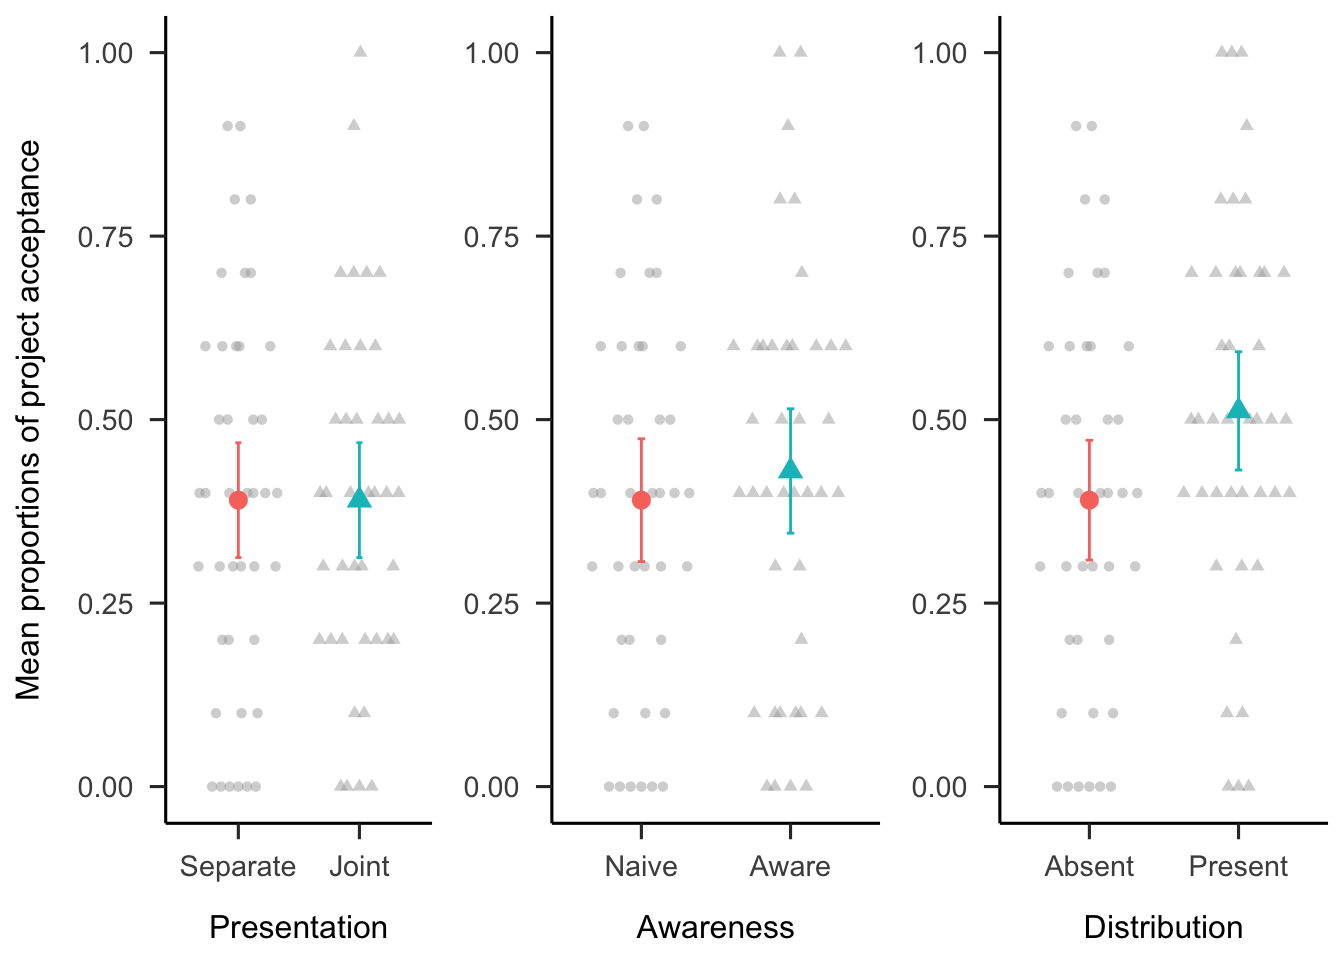 Mean proportion of project acceptance for the presentation, awareness, and distribution effects. The condition on the left of each effect is the reference condition (separate presentation, naive awareness, distribution absent). As such, it is identical for the three effects. Error bars represent 95% confidence intervals. Raw data are plotted in the background.